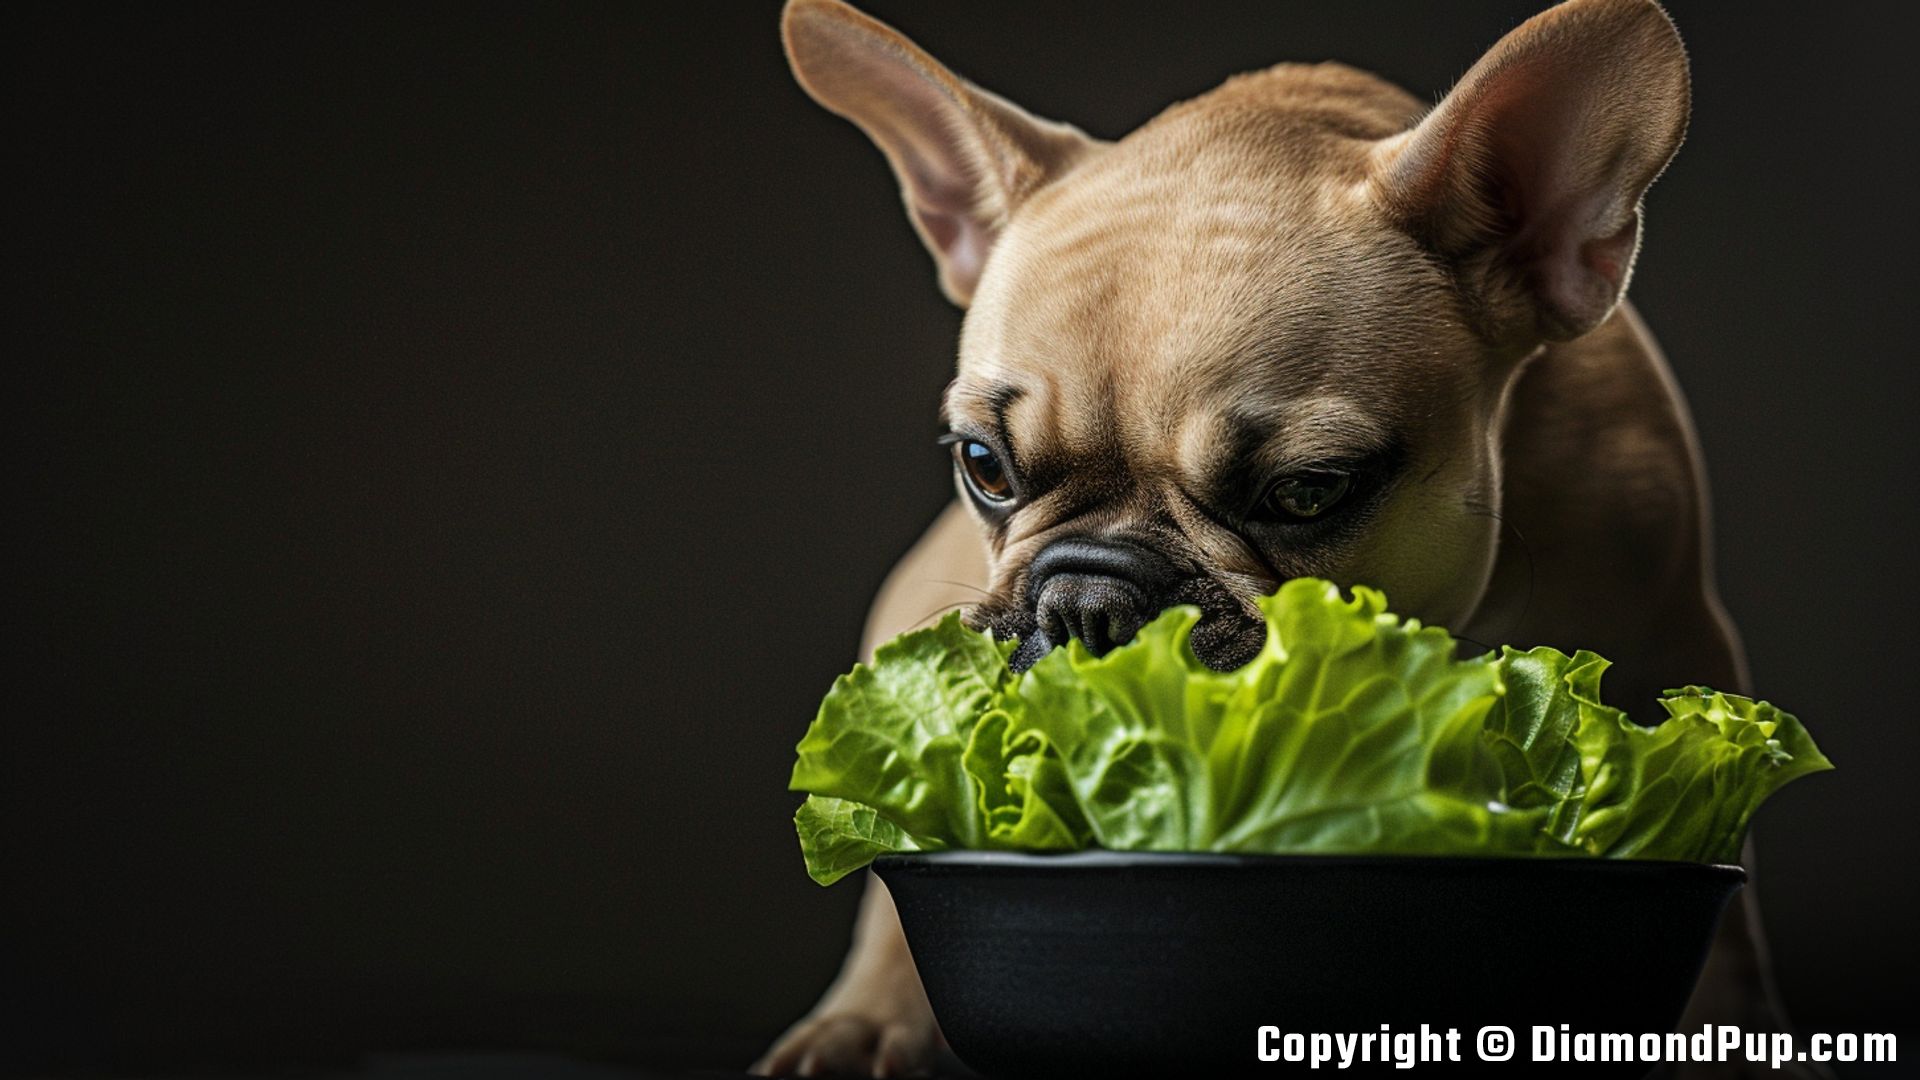 Photo of a Playful French Bulldog Eating Lettuce